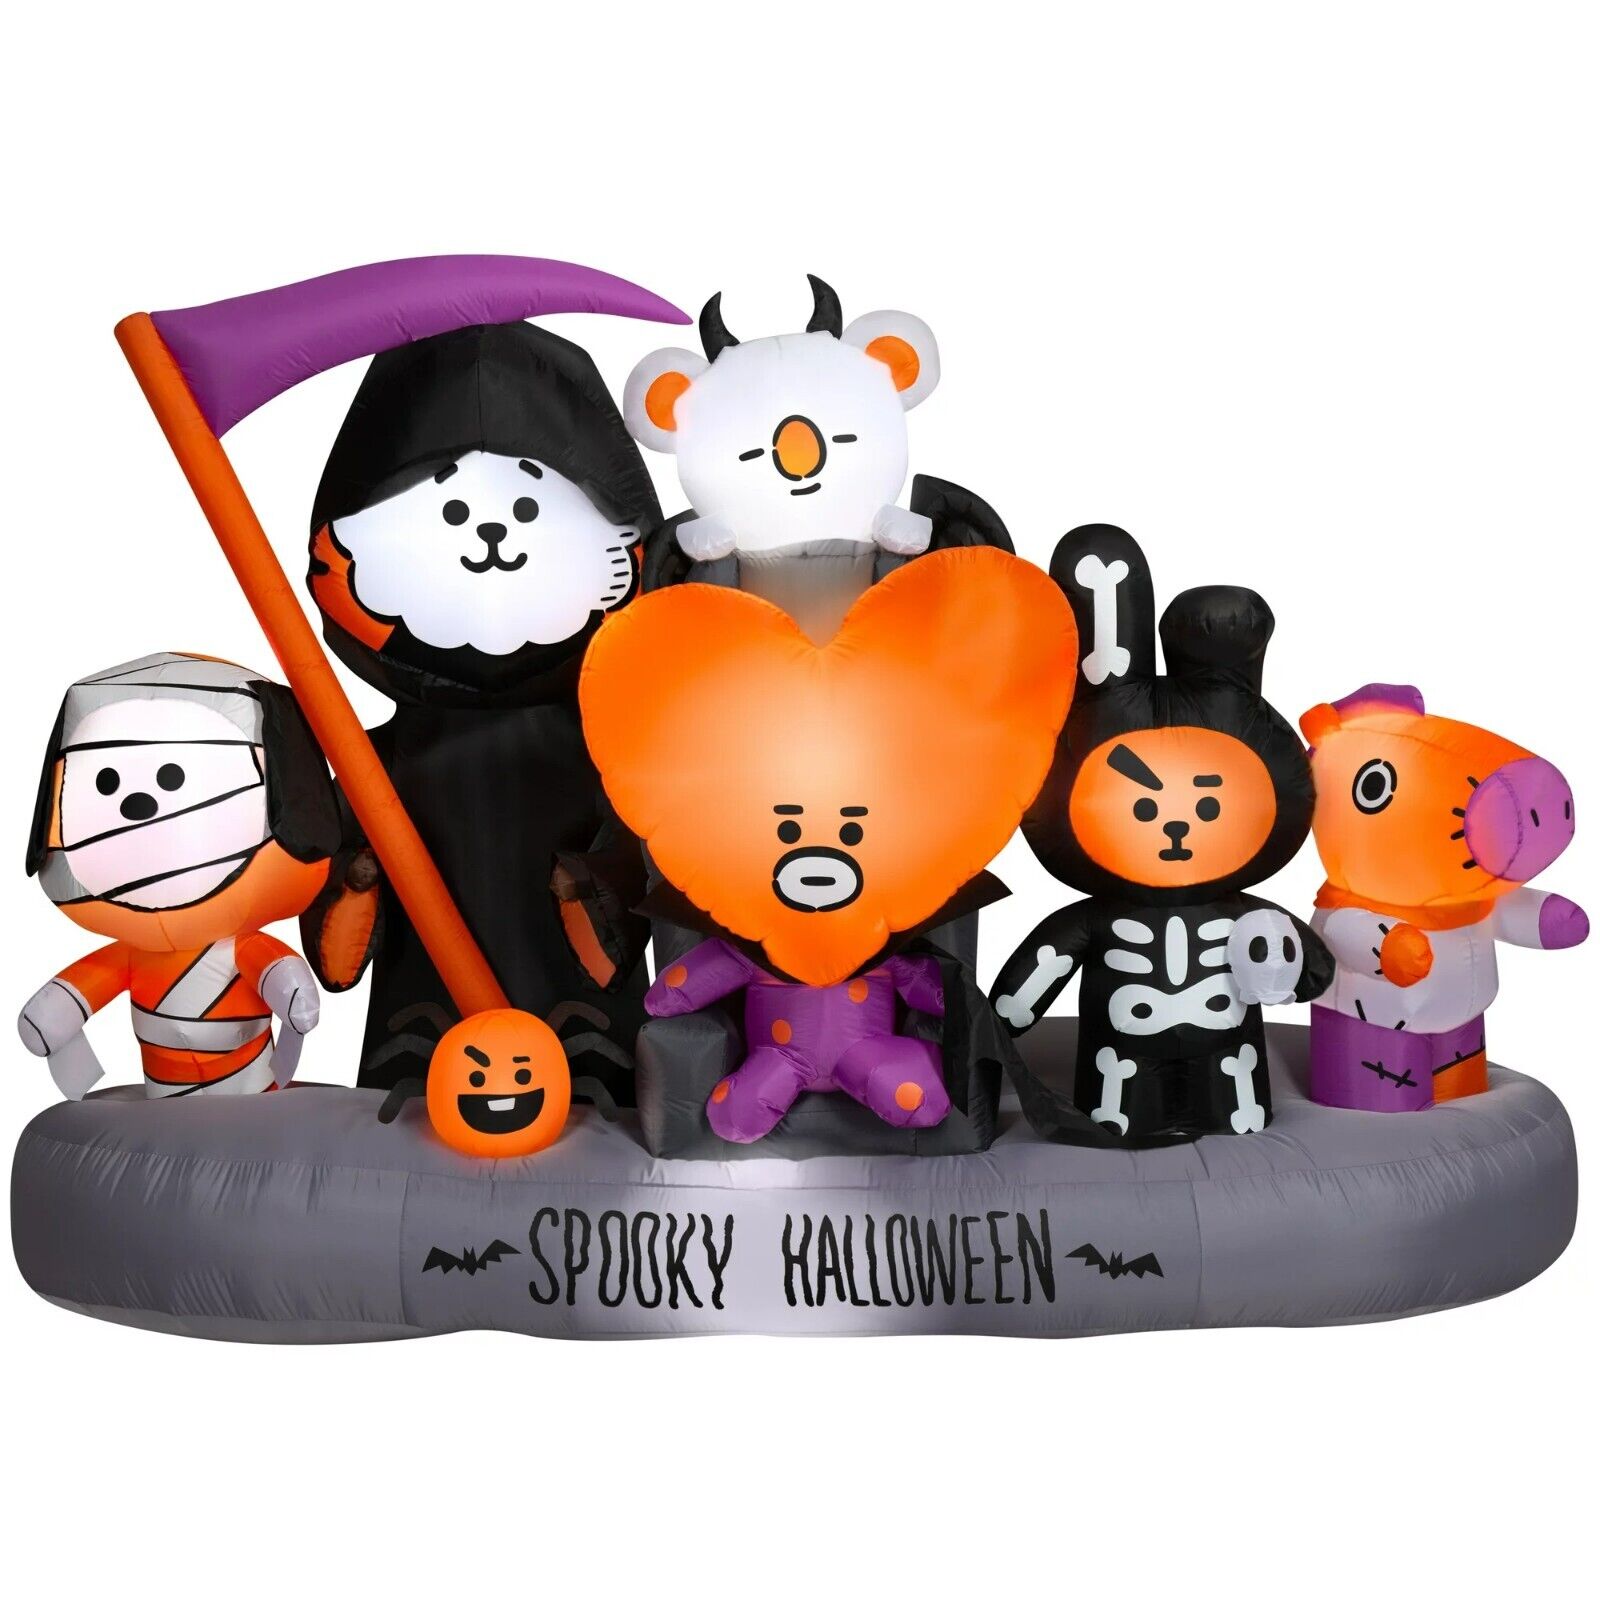 102 Inch Line Friends BT21 Scene for Halloween by Airblown Inflatables